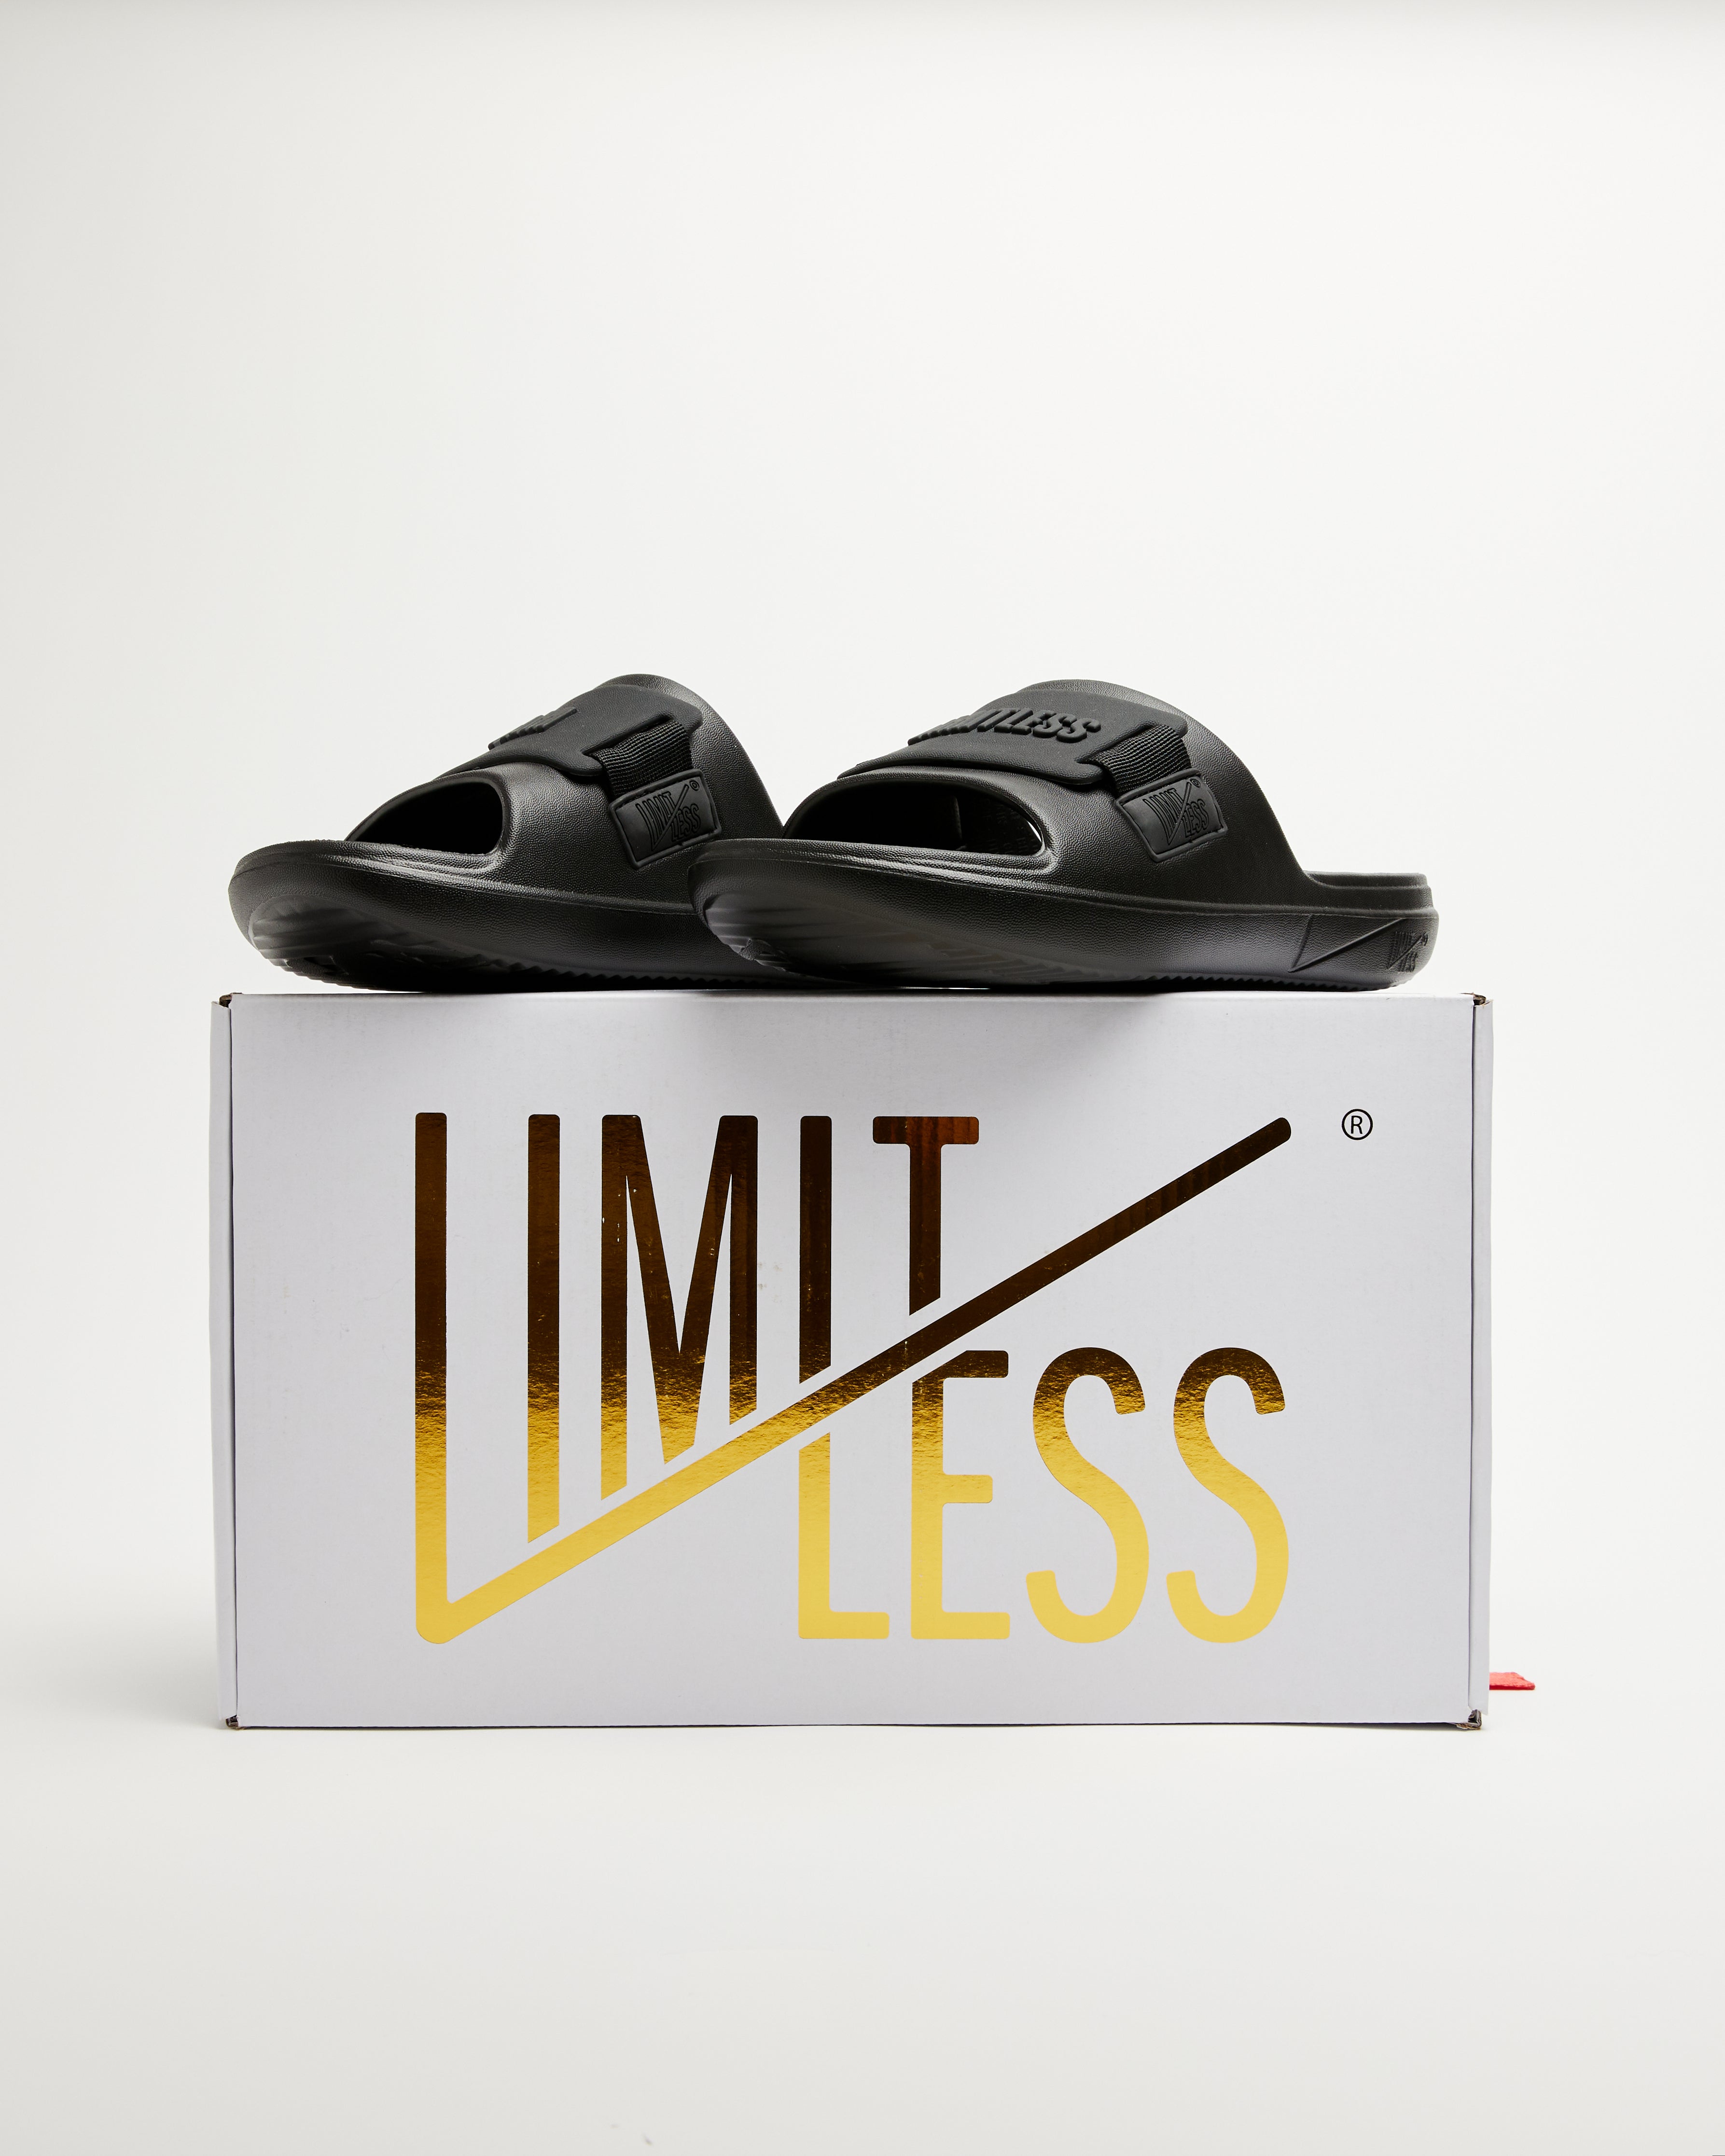 LIMITLESS SLIDES™ WITH ESSENTIAL TIBAH™ QUAD - NEW ALBANY HIGH SCHOOL EDITION